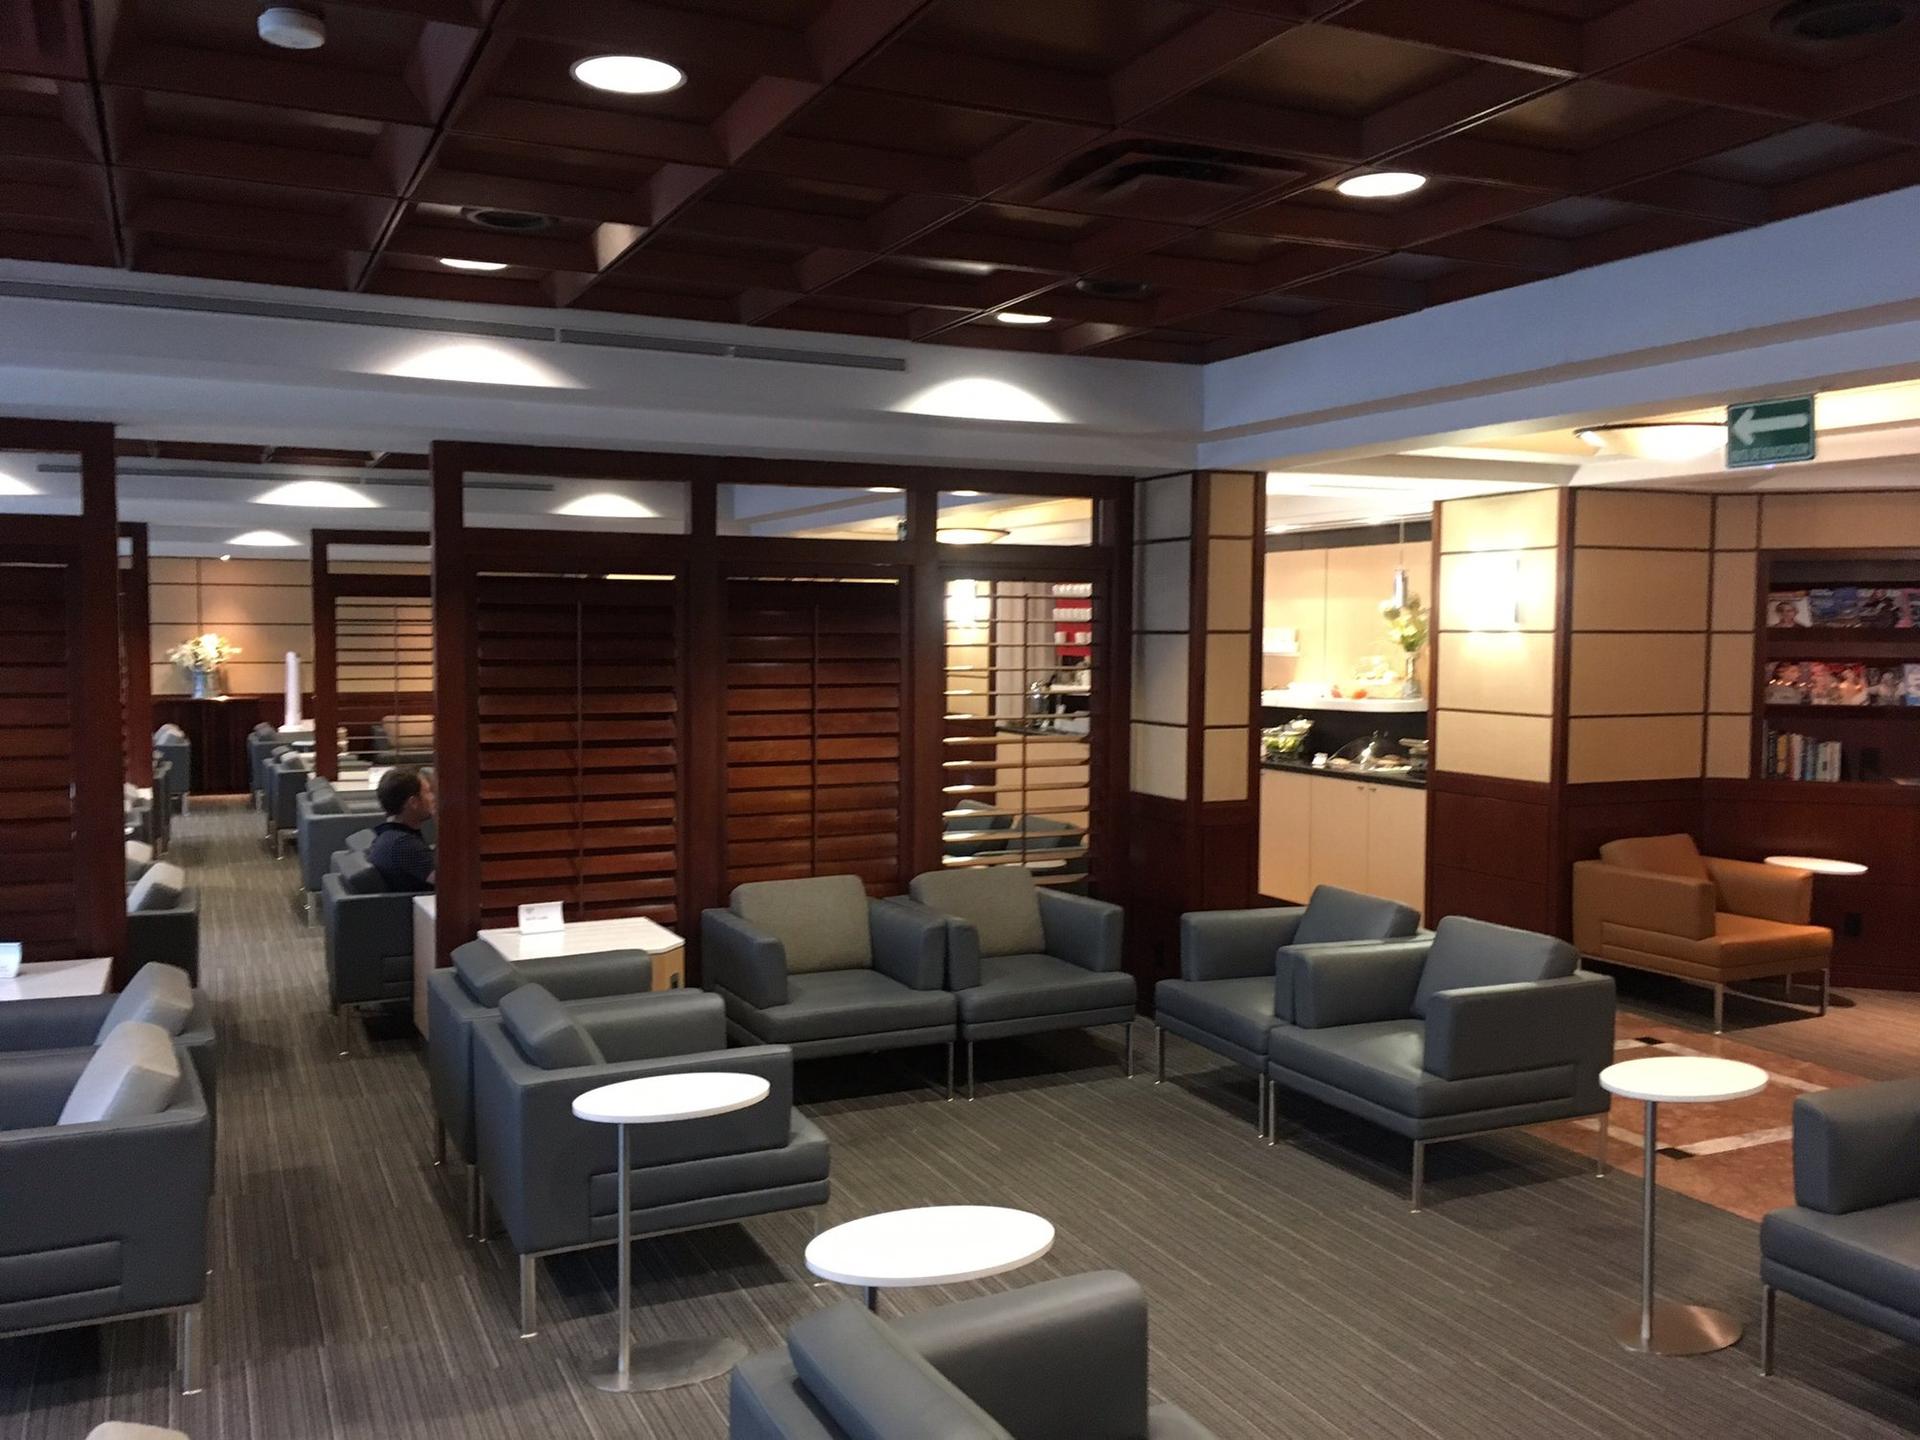 American Airlines Admirals Club image 17 of 32